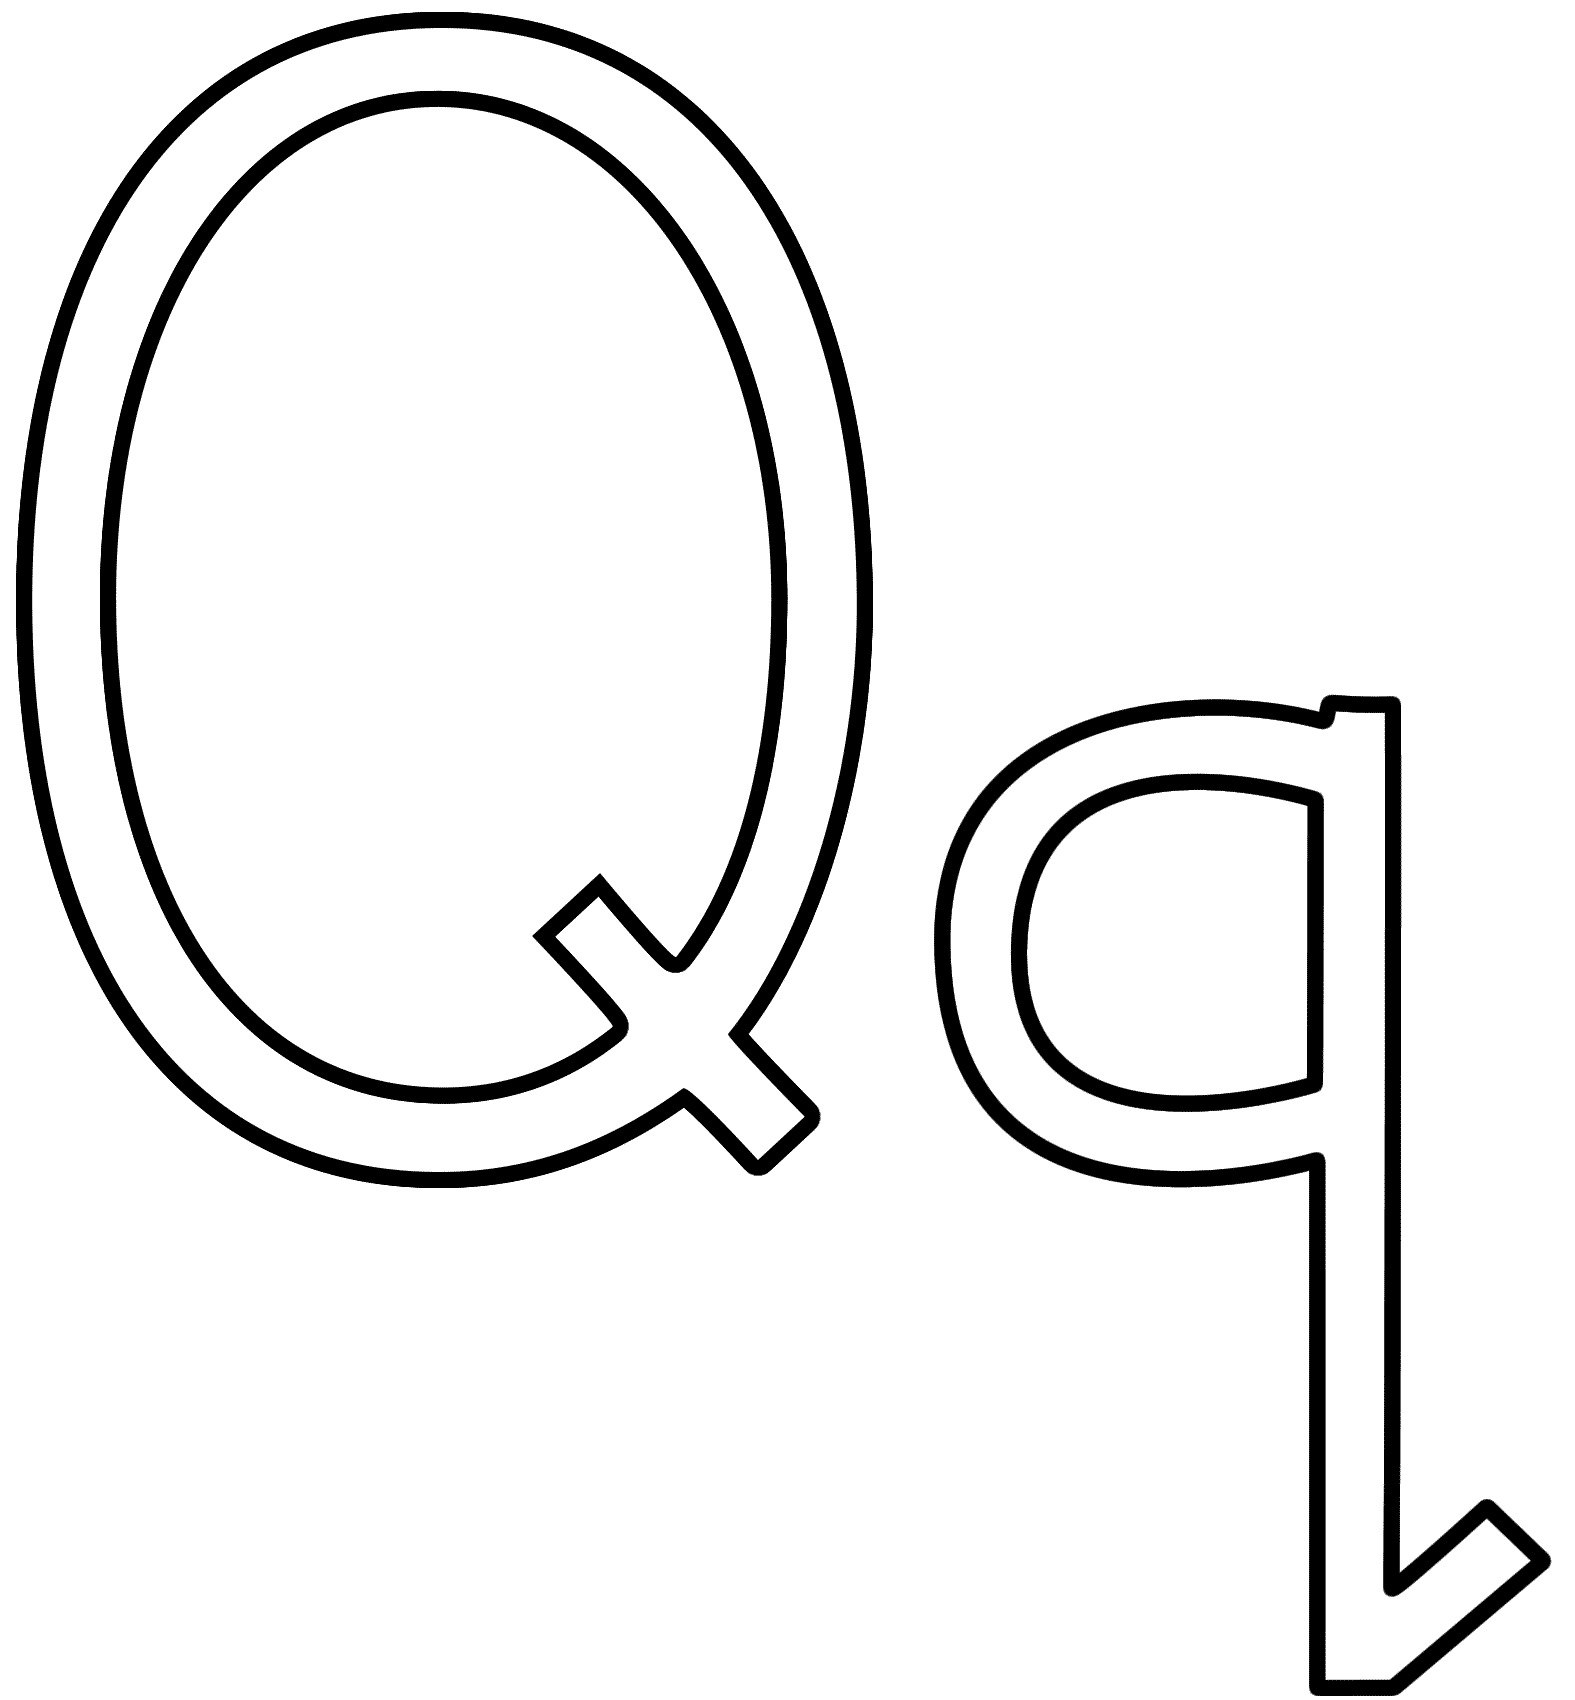 Coloring Pages Letter Q Coloring Home